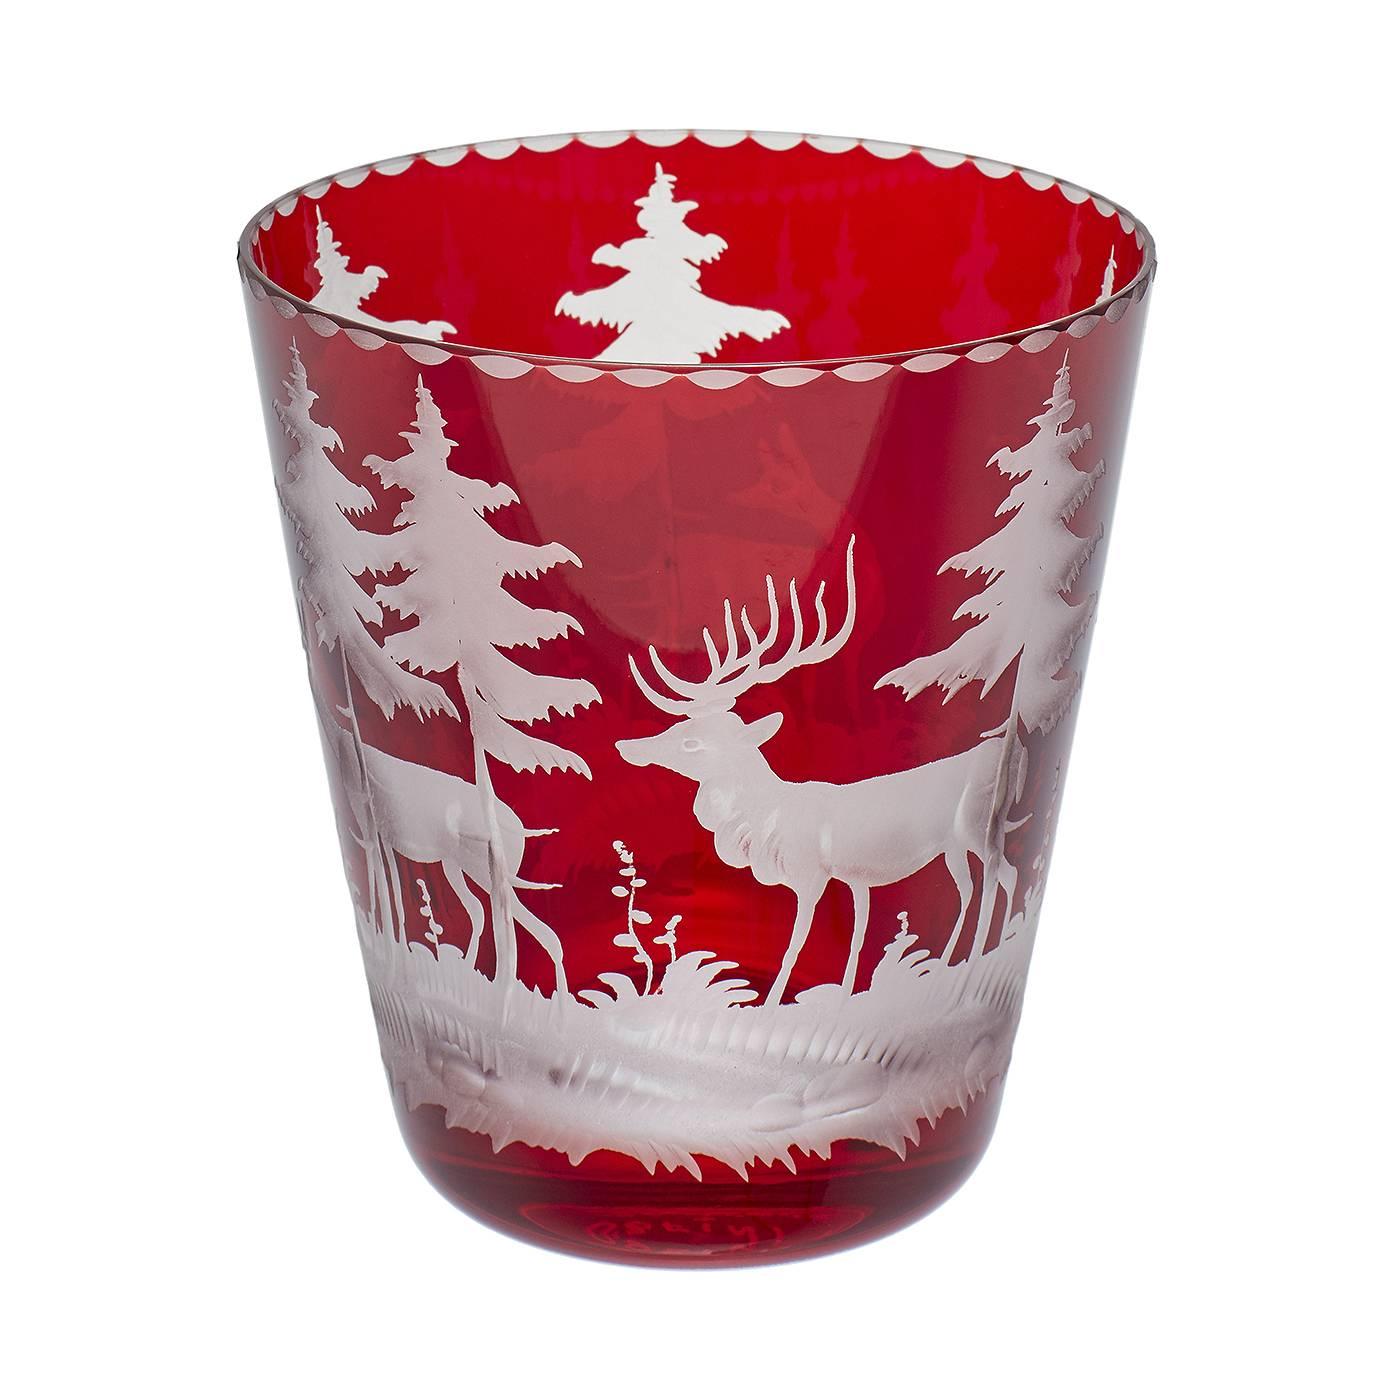 Set of six handblown red crystal tumblers with hand-edged hunting scene. The decor is an antique black forest hunting scene decor with deers, trees and bambis all around. Completely handblown and hand-engraved in Bavaria Germany. The glass shown